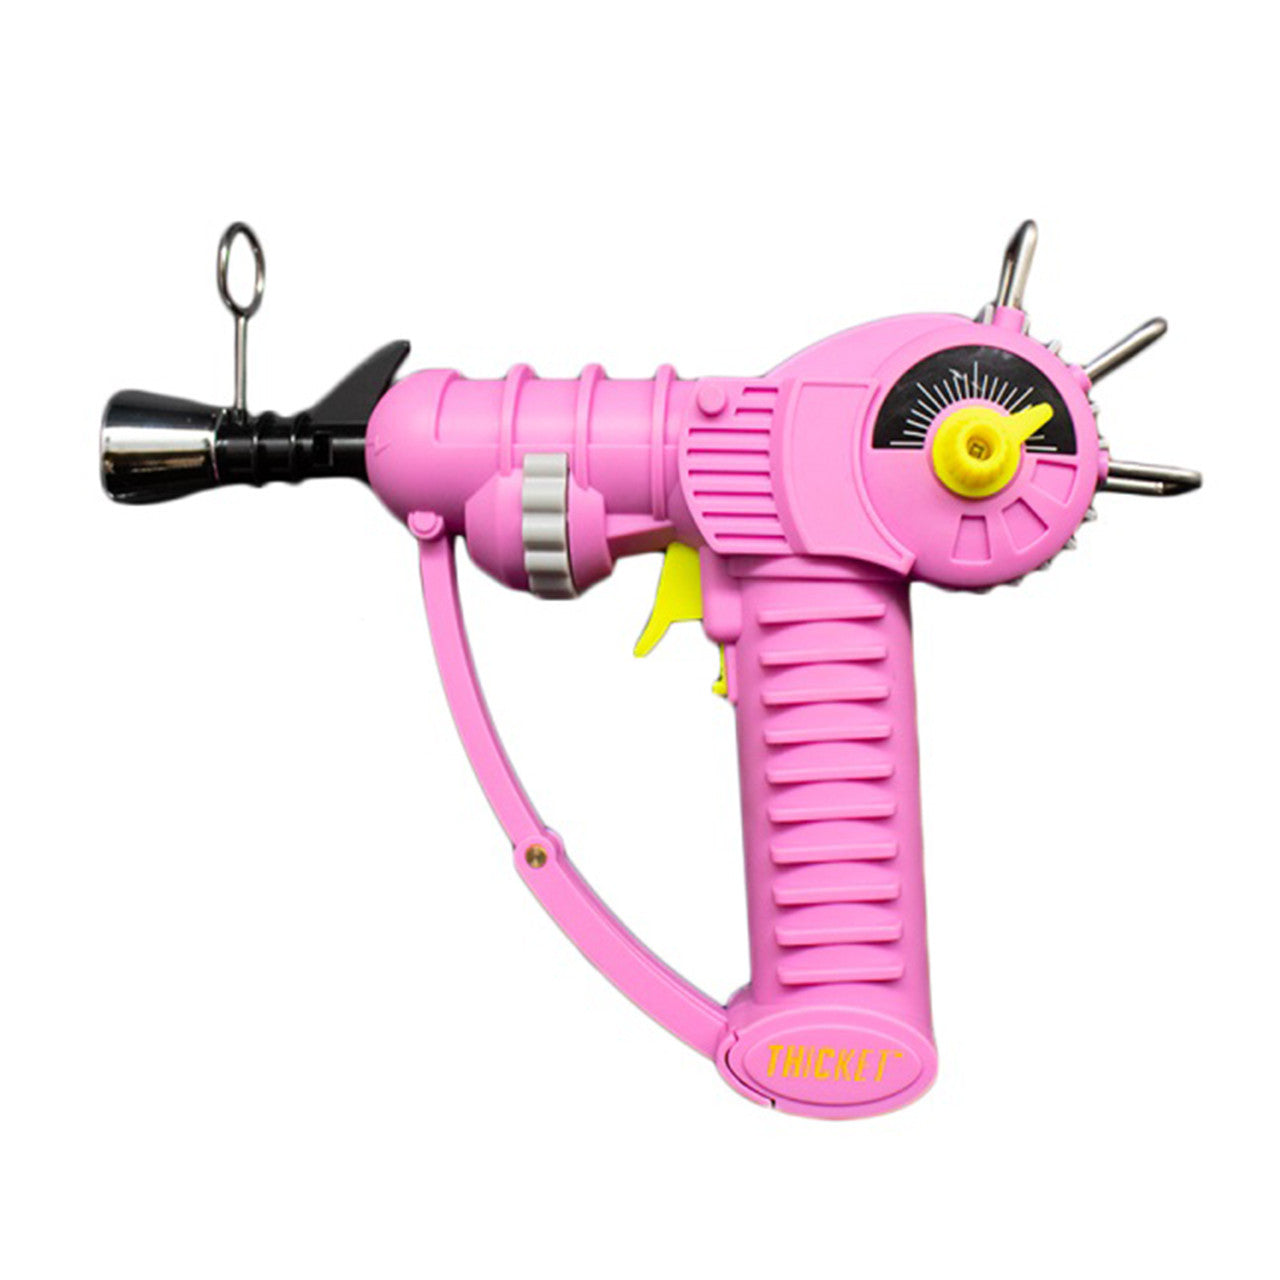 Thicket Spaceout Raygun Torch Pink